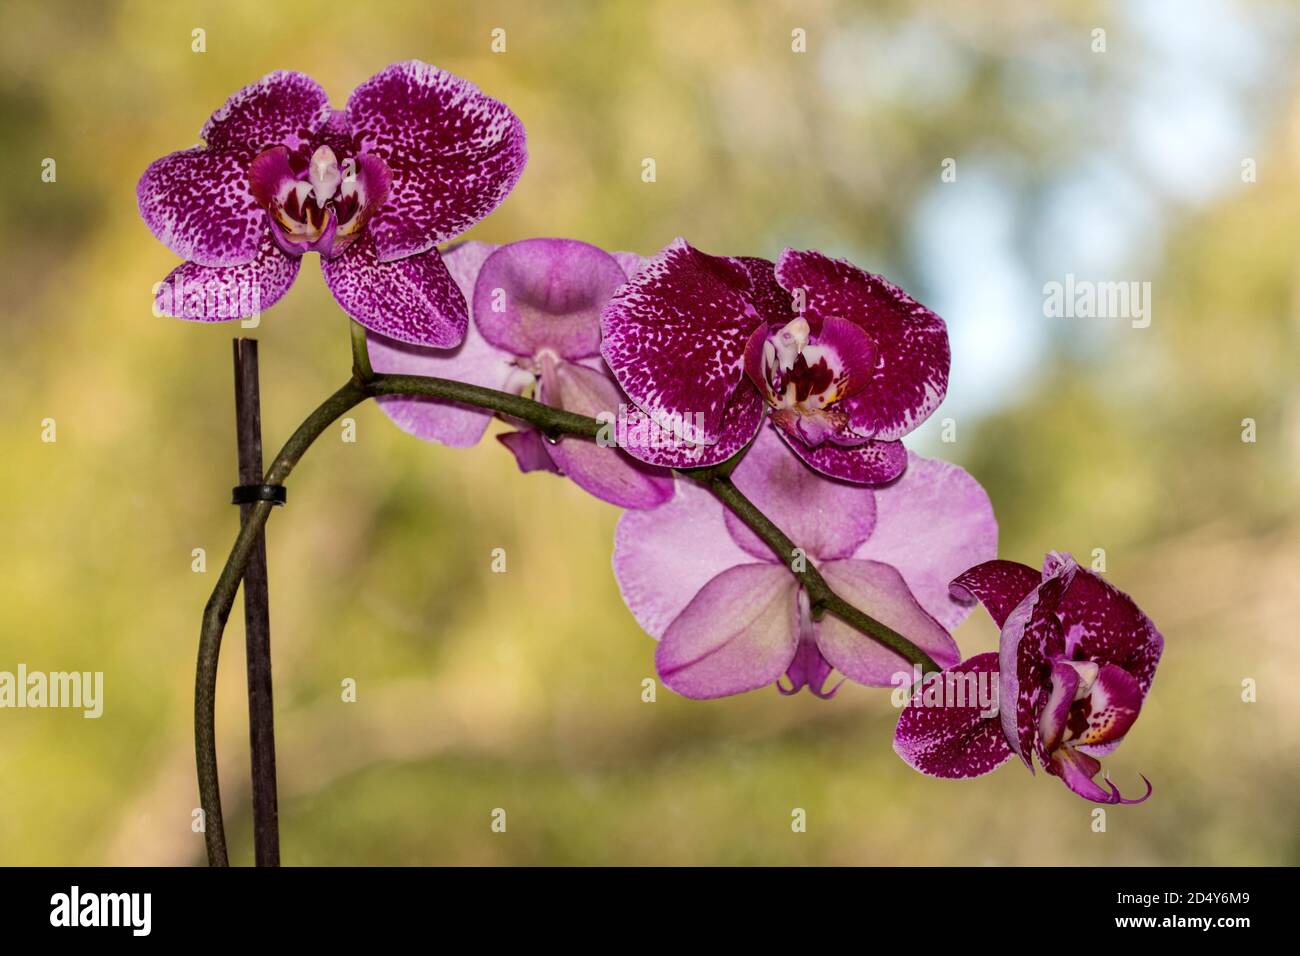 Cattleya Orchid plant in flower Stock Photo